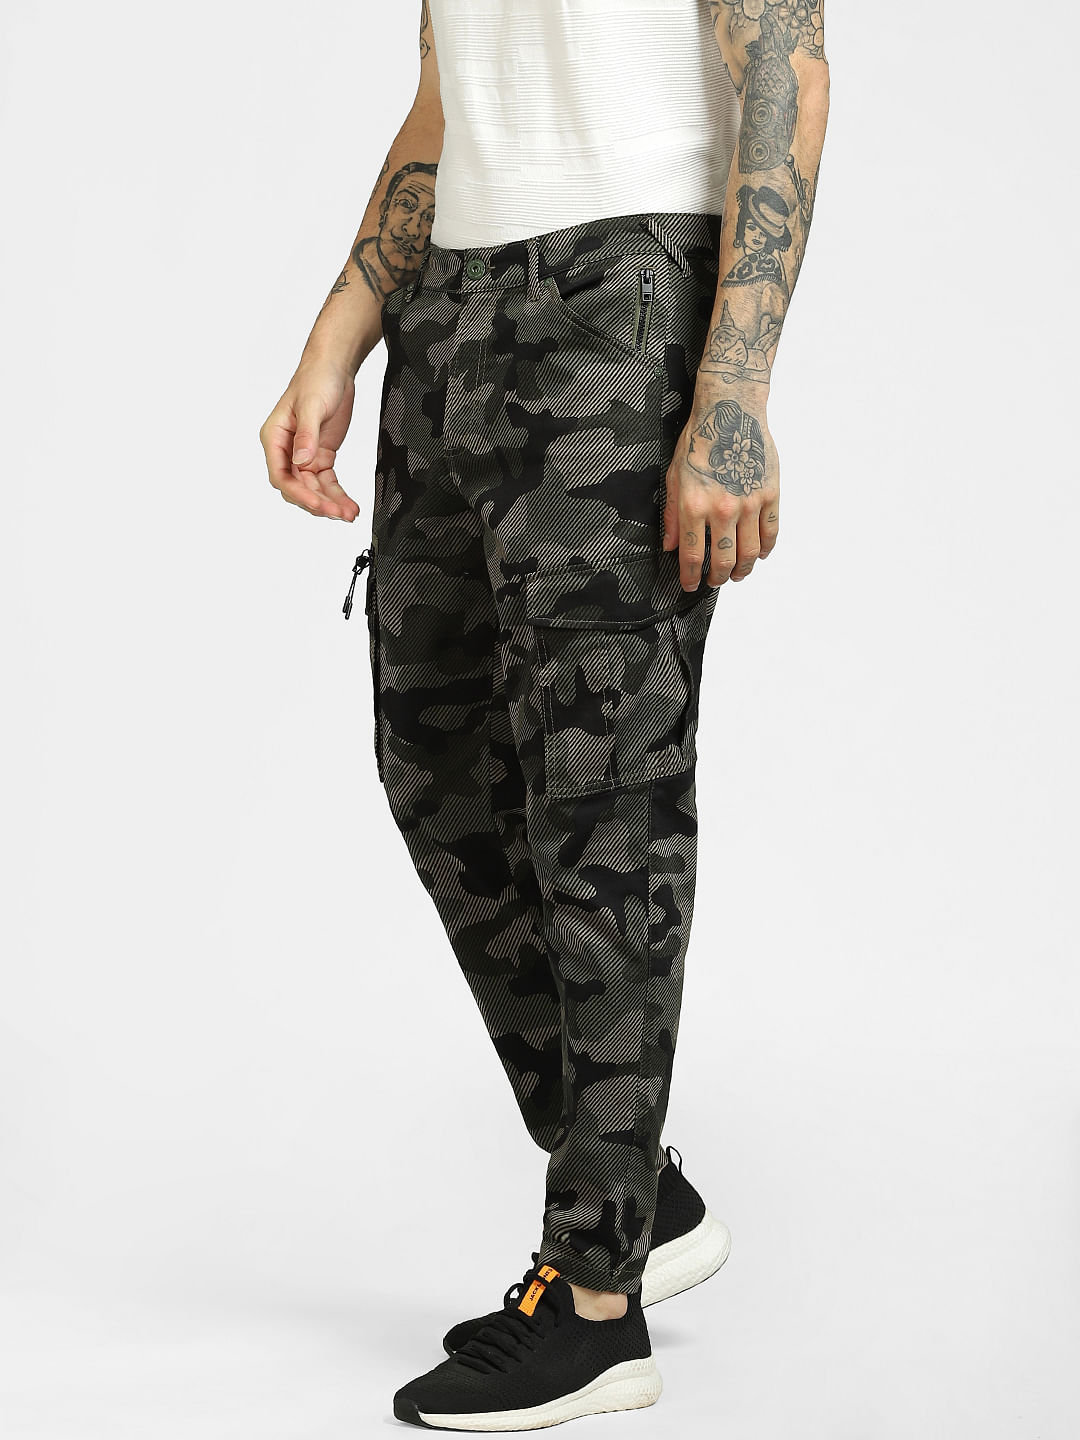 Jogger BLACK AND GREY CAMOUFLAGE PRINT WITH GRIP LOWER - Militaryshop